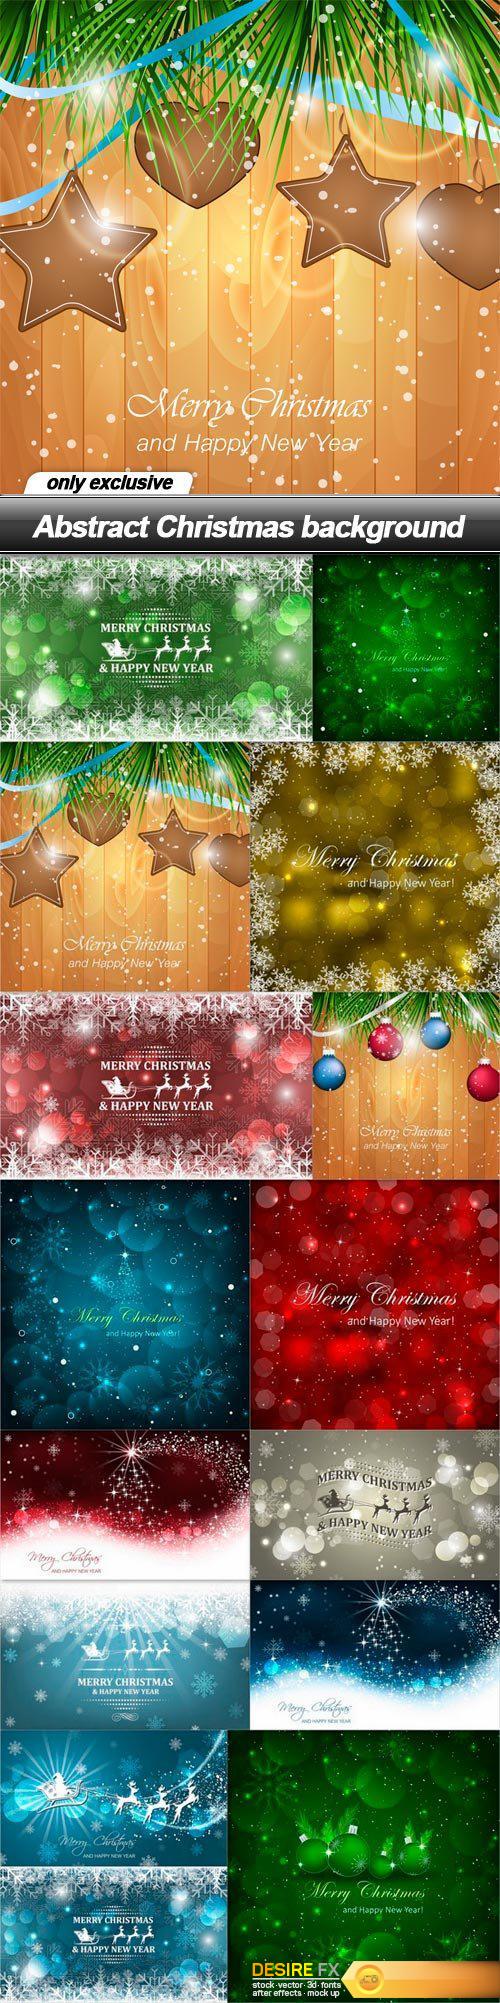 Abstract Christmas background - 15 EPS